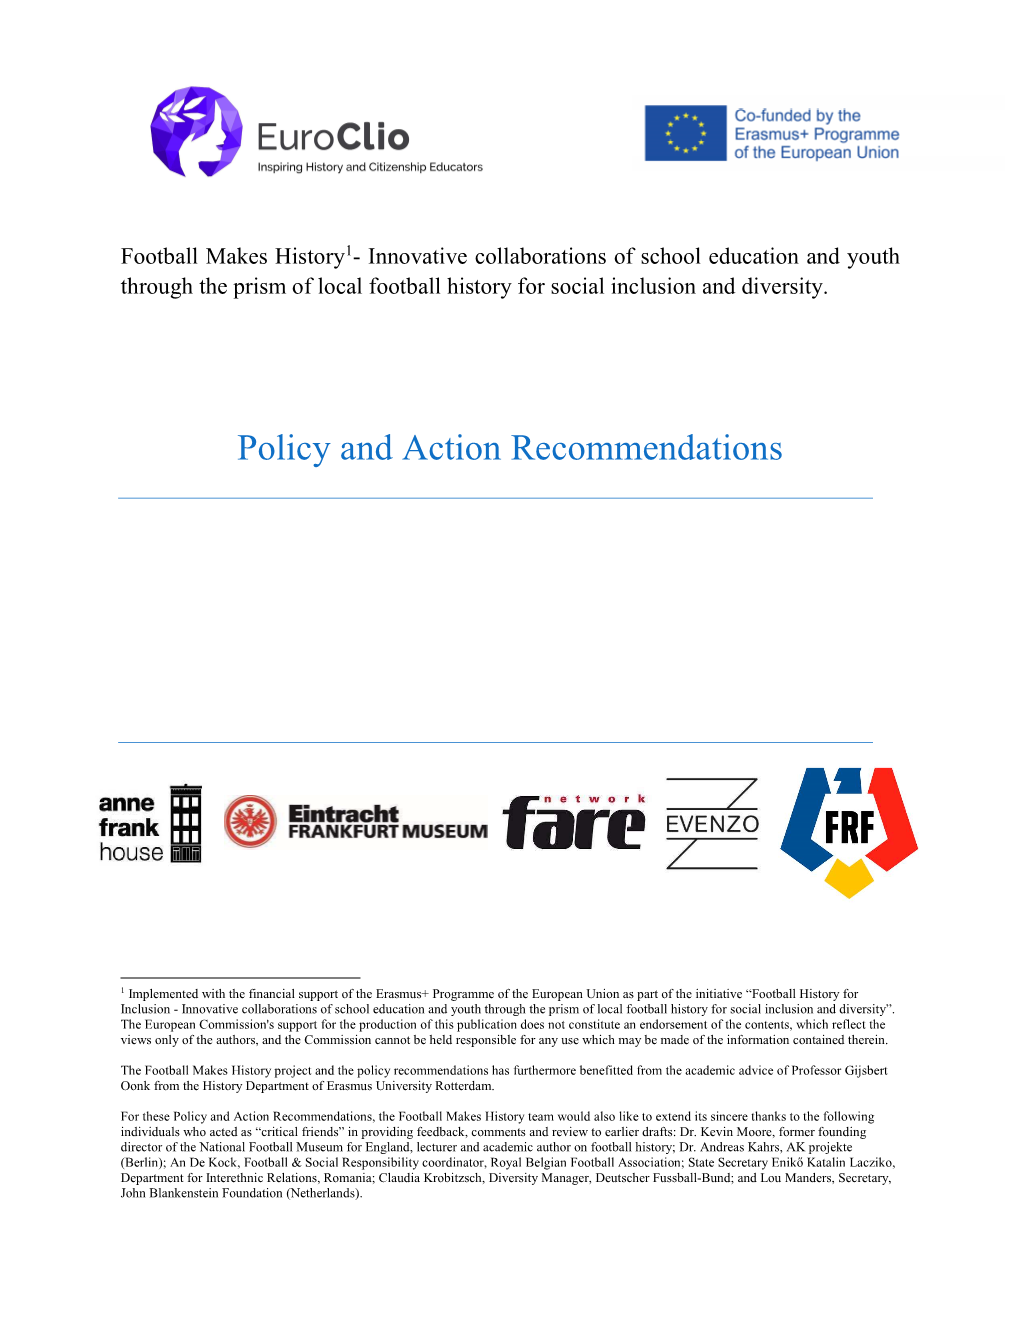 Policy and Action Recommendations